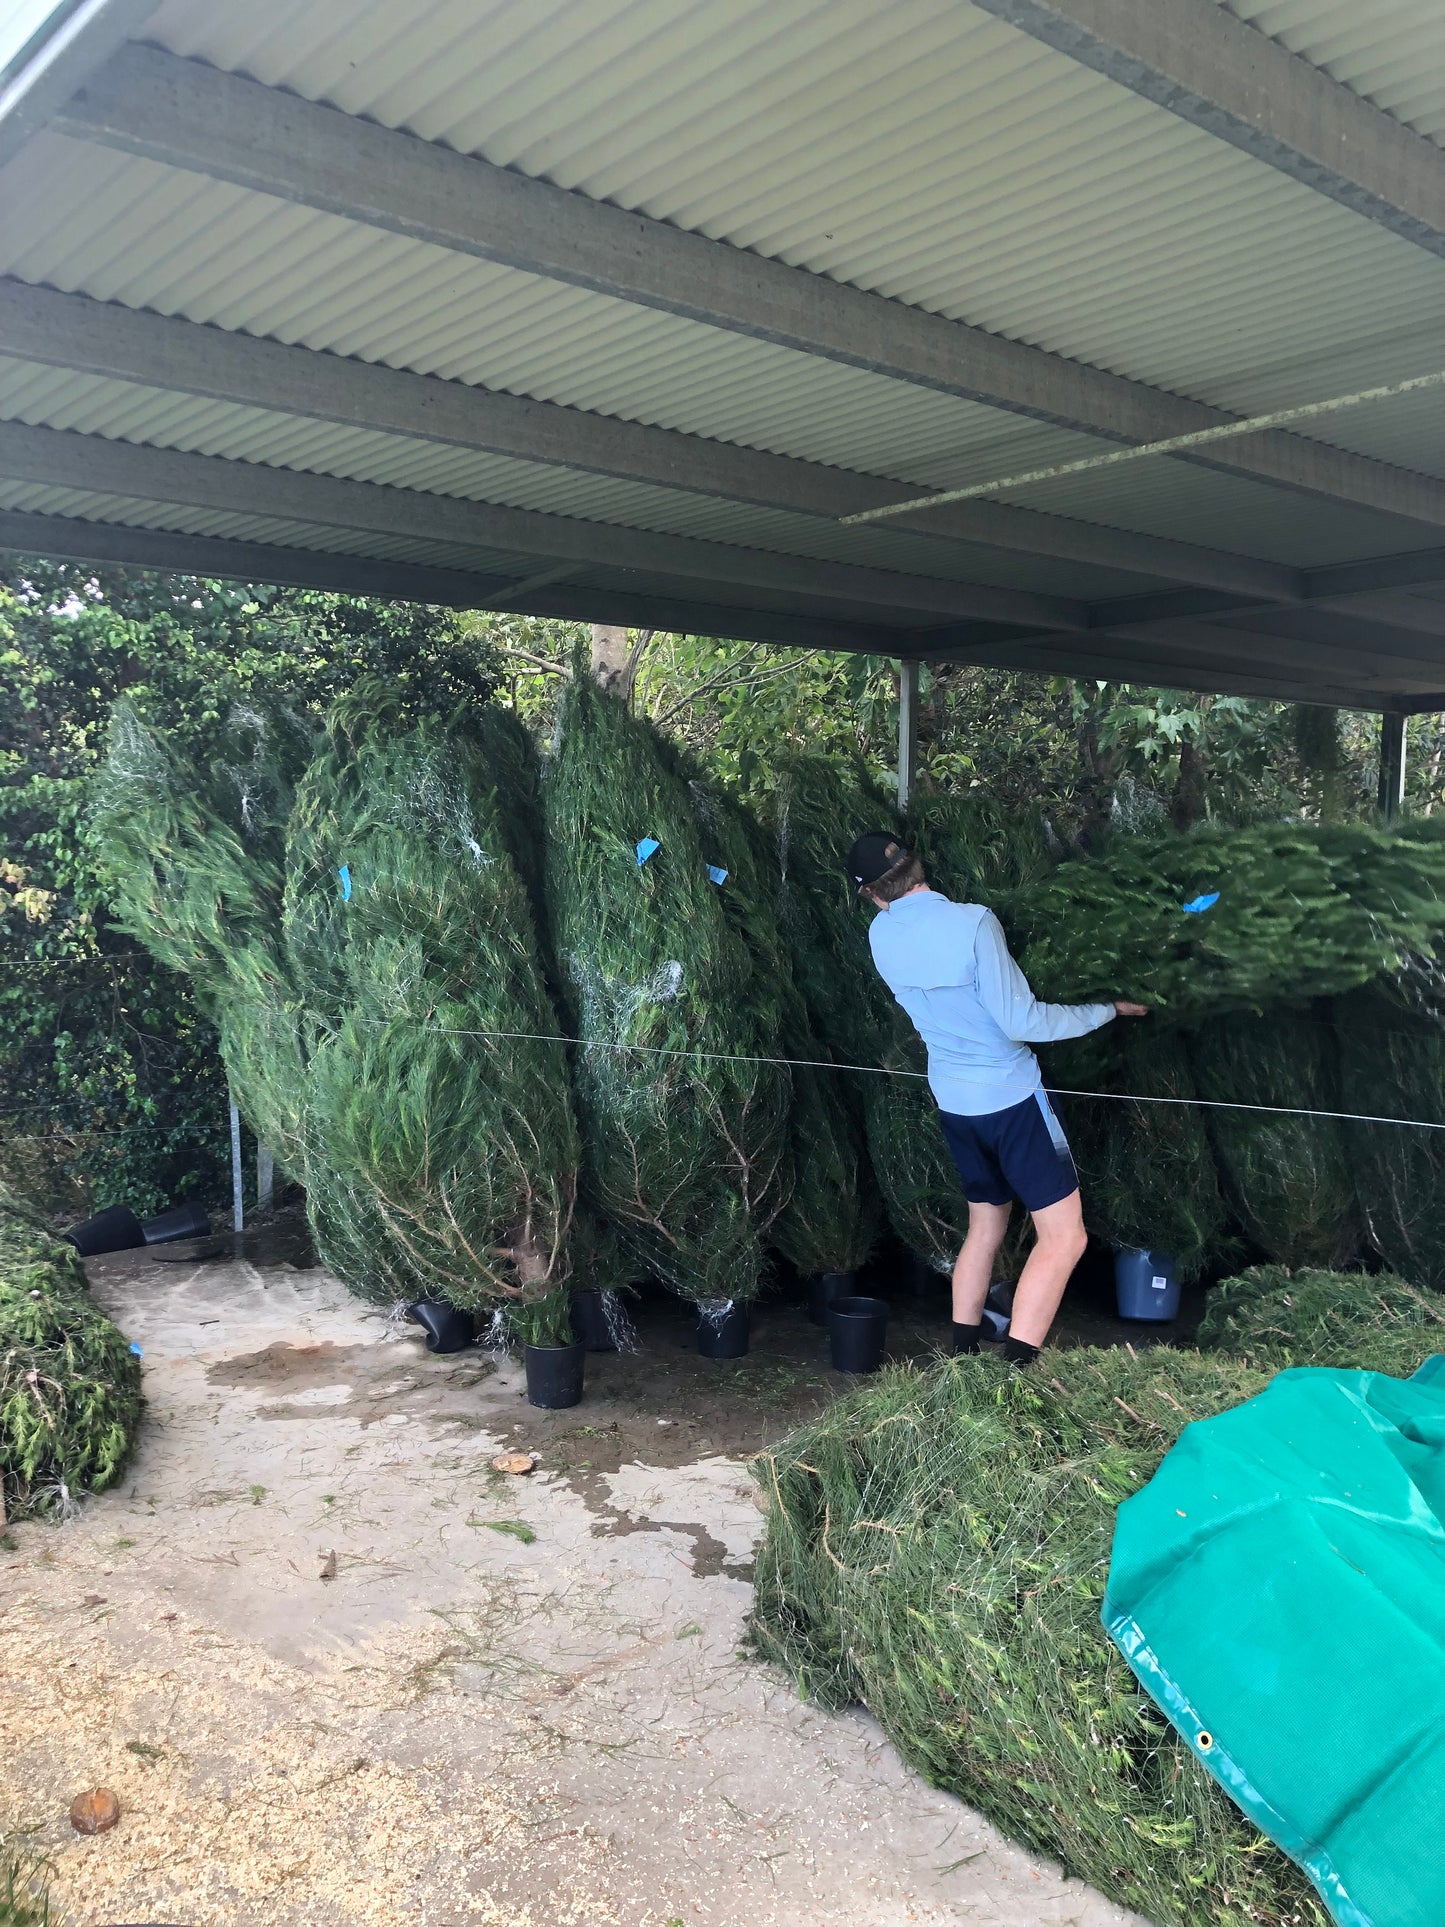 Large Christmas Tree (8ft) Delivery